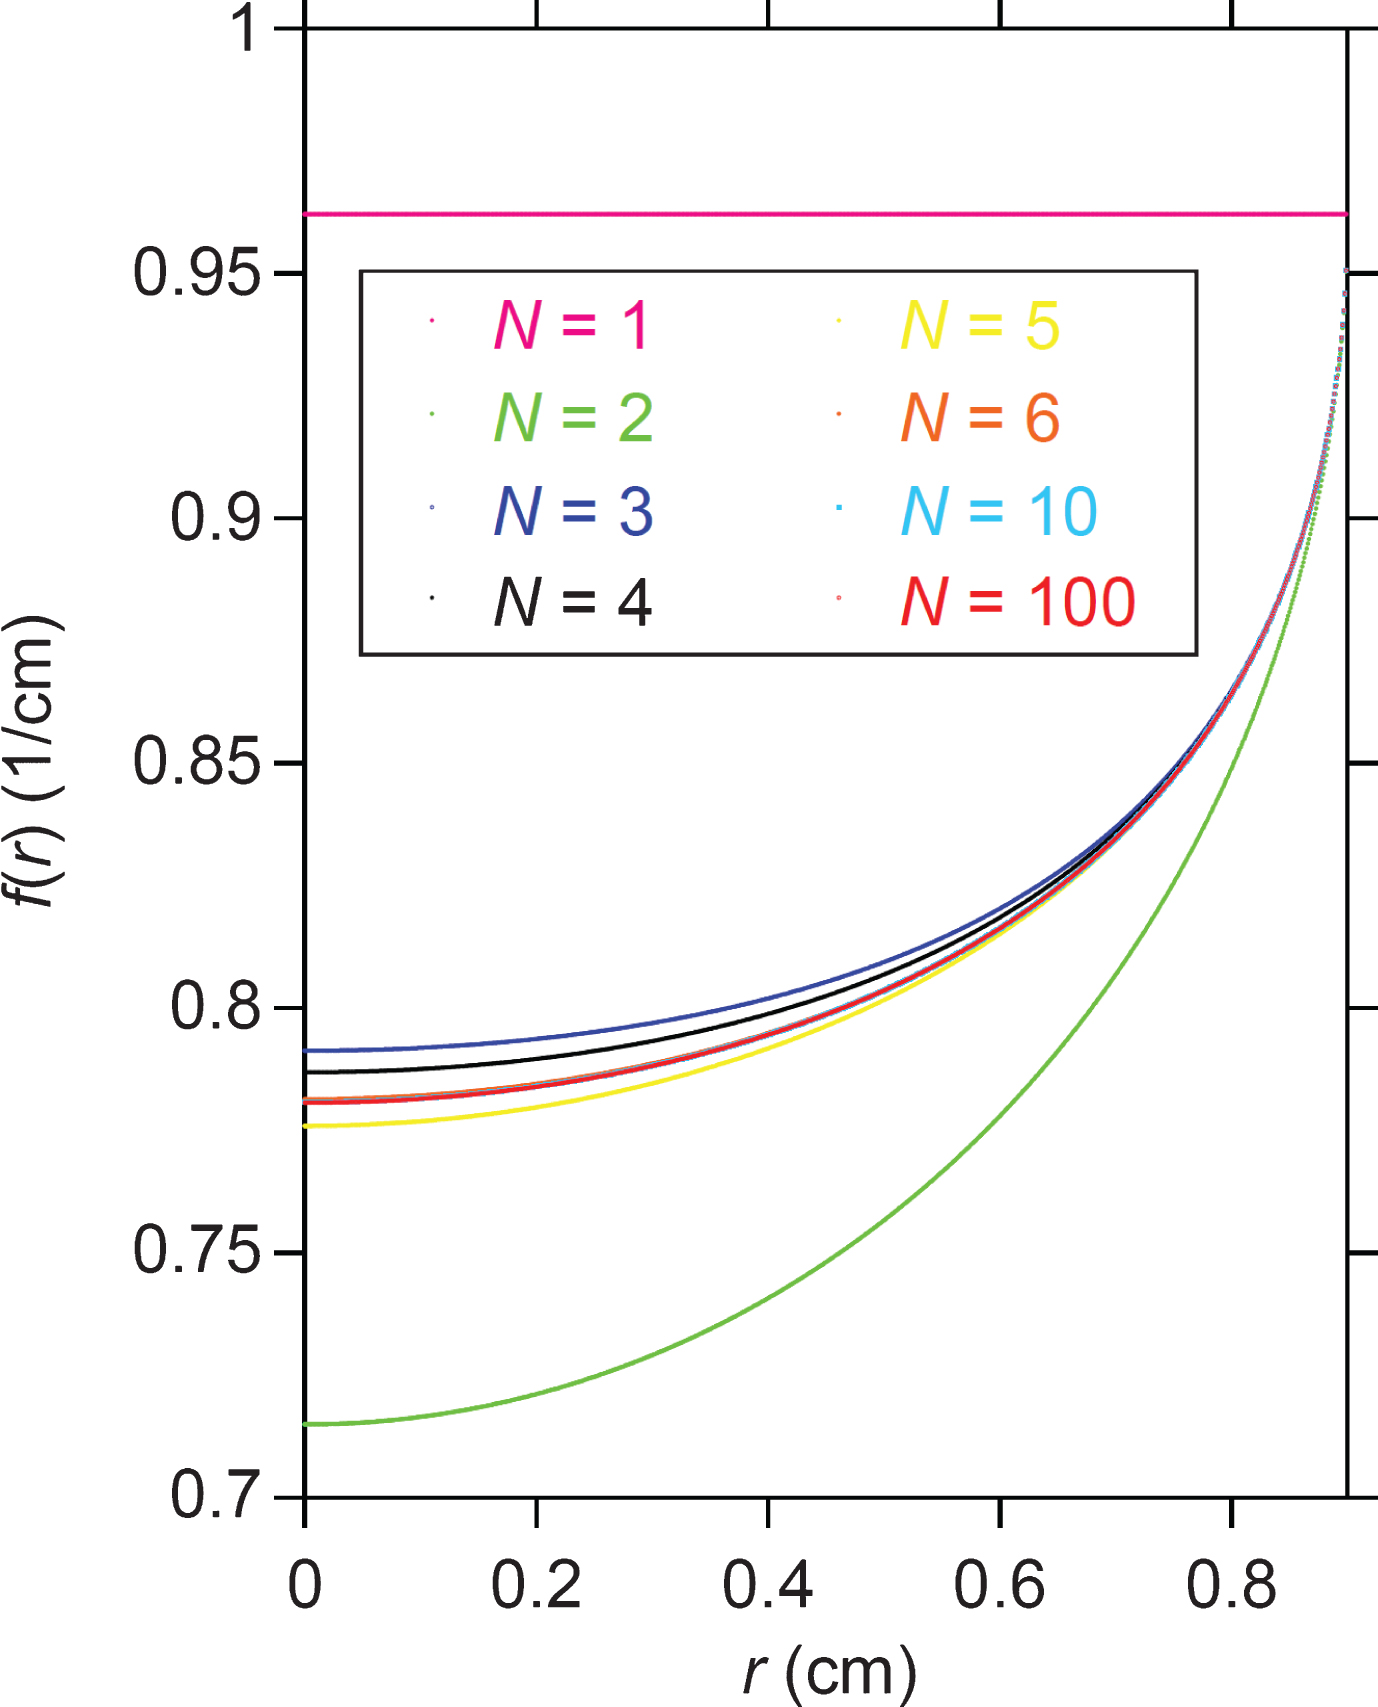 The dependence of the exact solution, f(r), on N. Here, f(r) for N = 100 is the same as that plotted in Fig. 2c, and it is difficult to distinguish the f(r) curves for N = 6, 10, and 100 due to the good agreement.